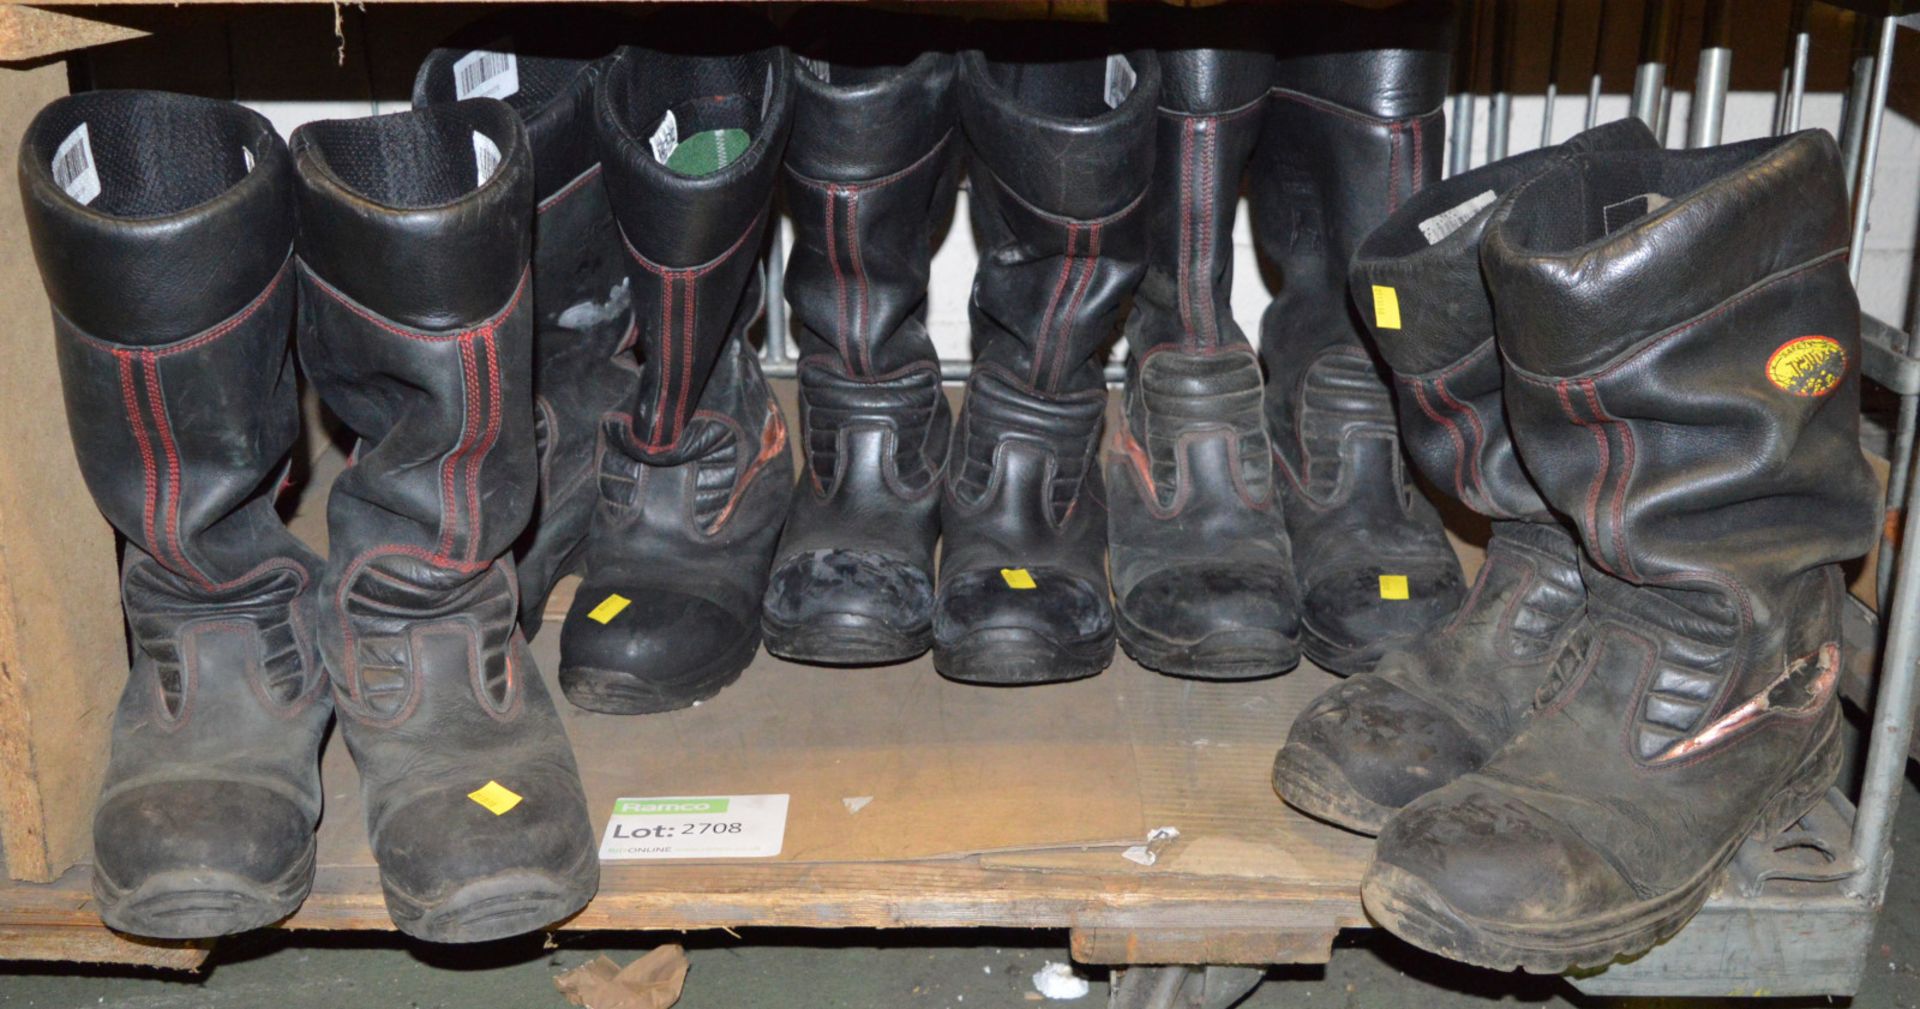 5x Pairs Jelly Safety Boots - Sizes to follow.